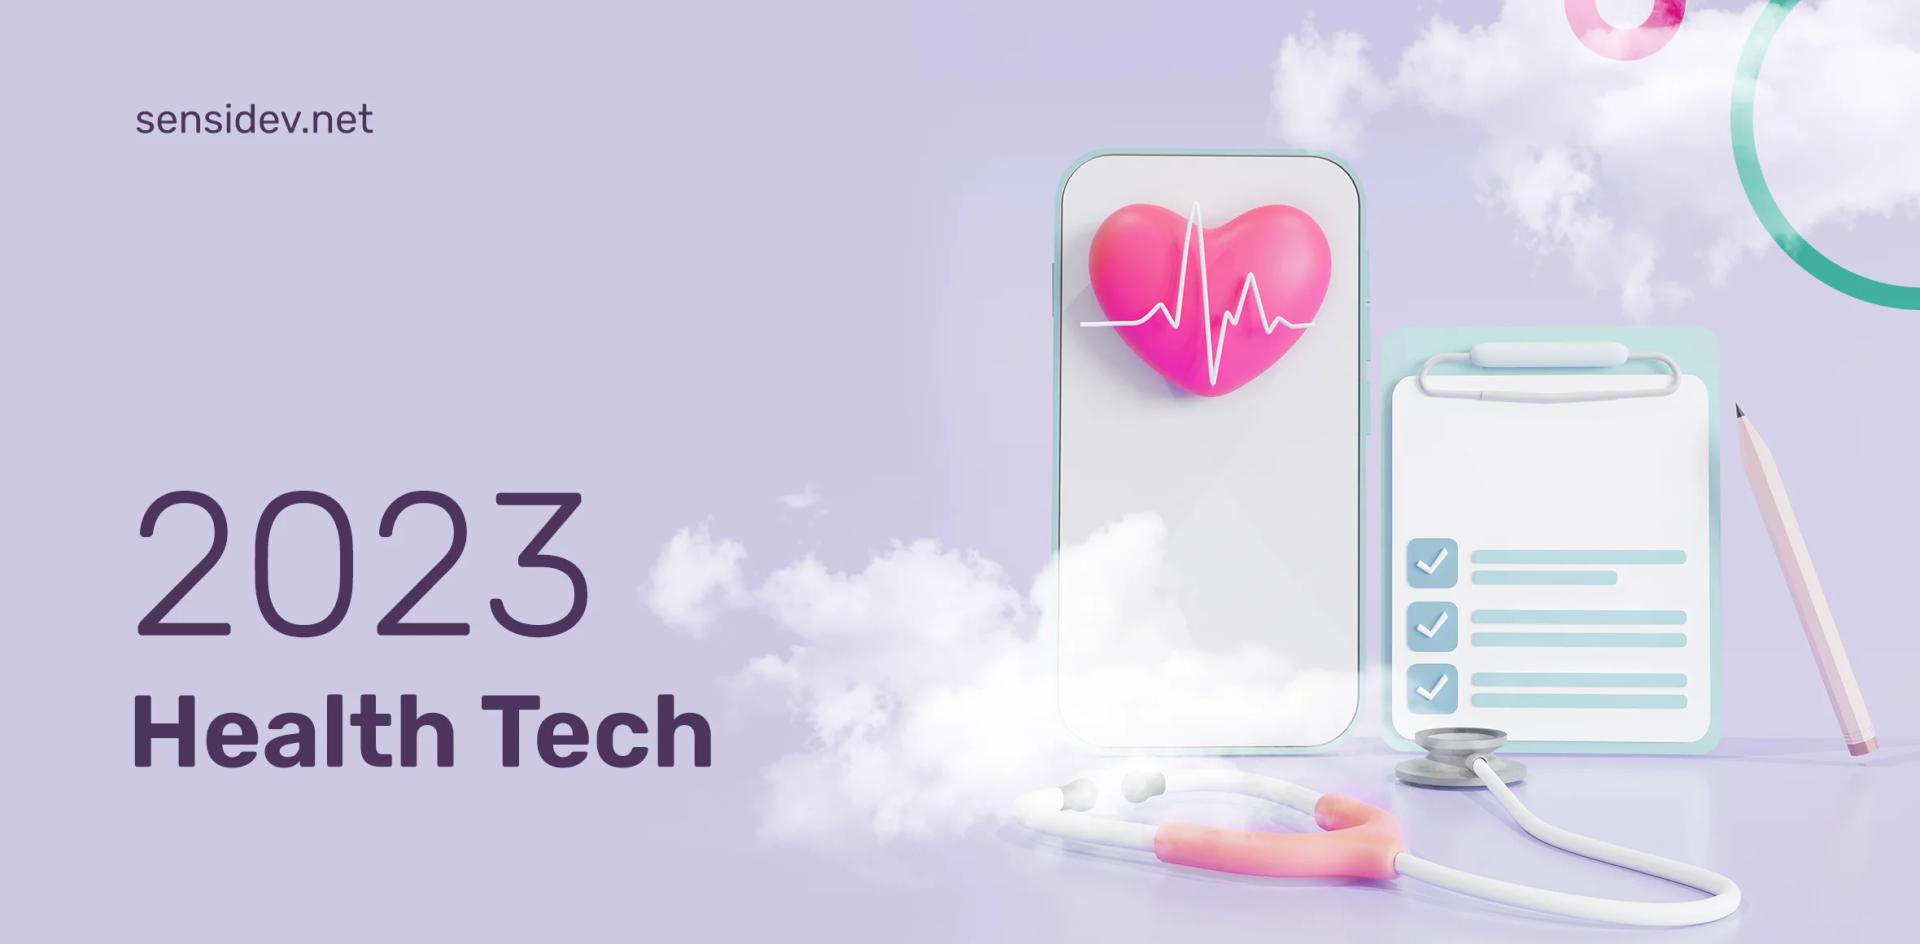 What to look forward to in 2023's health tech